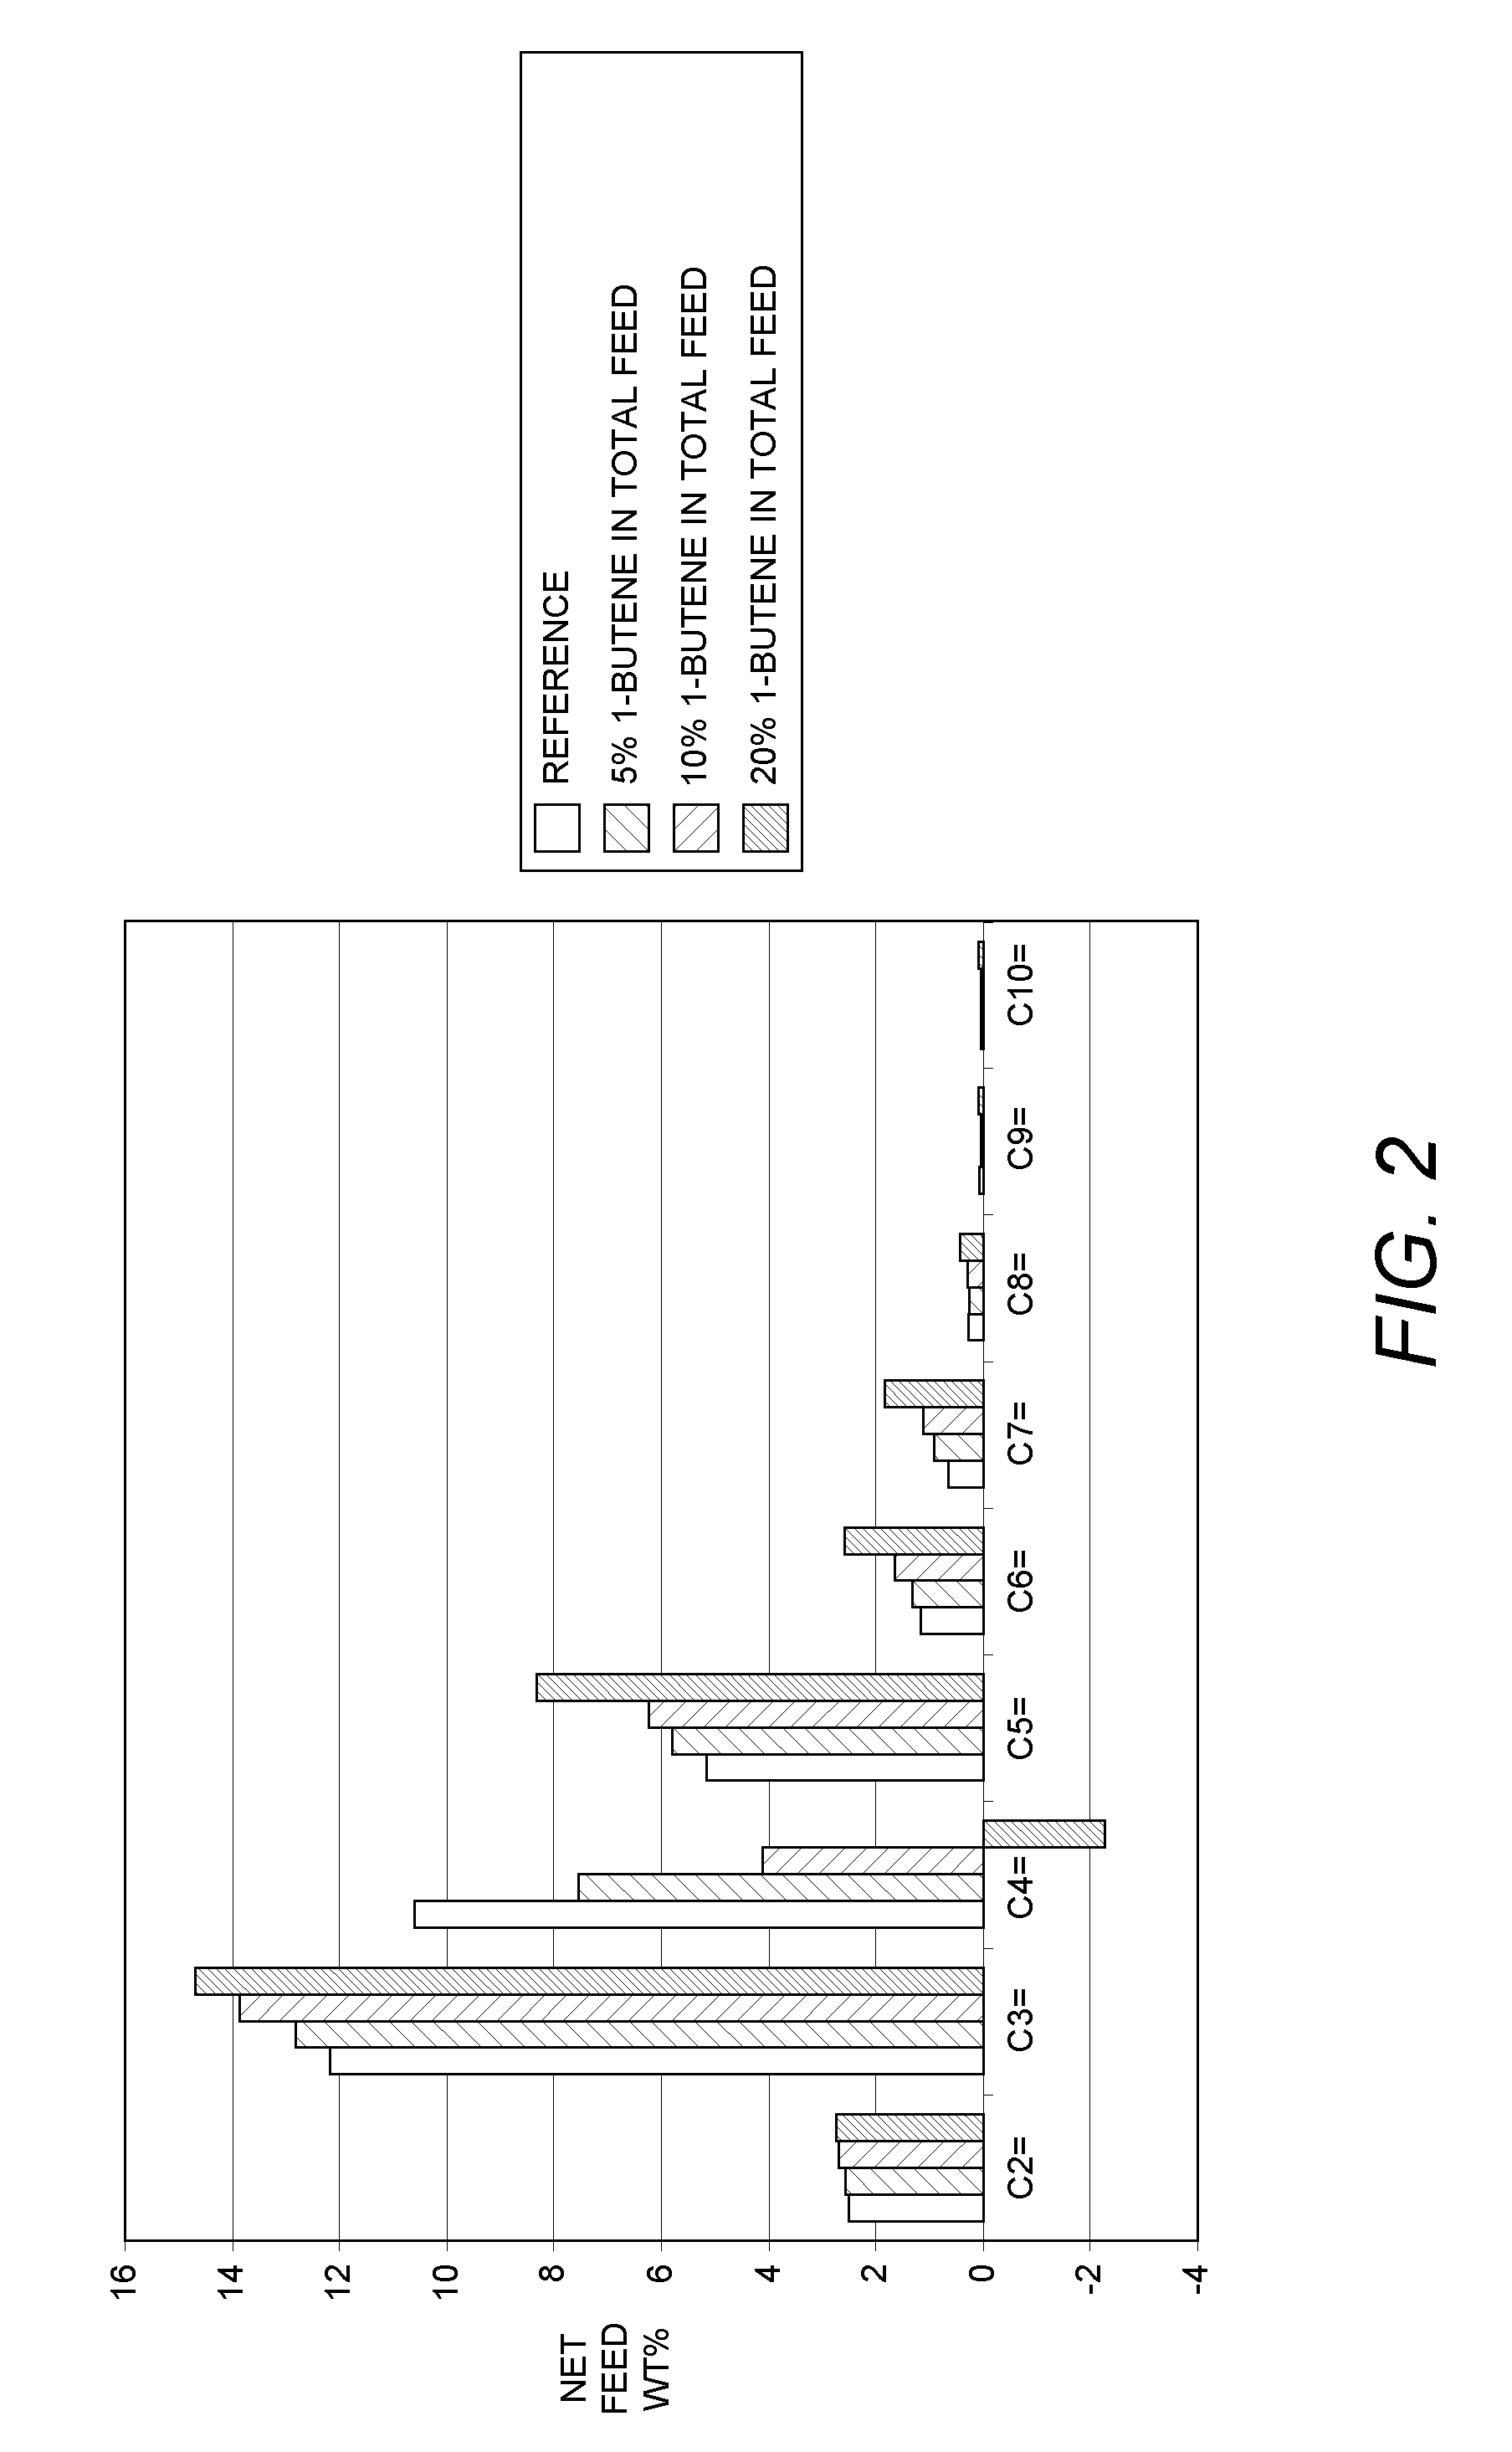 Fluid catalytic cracking system